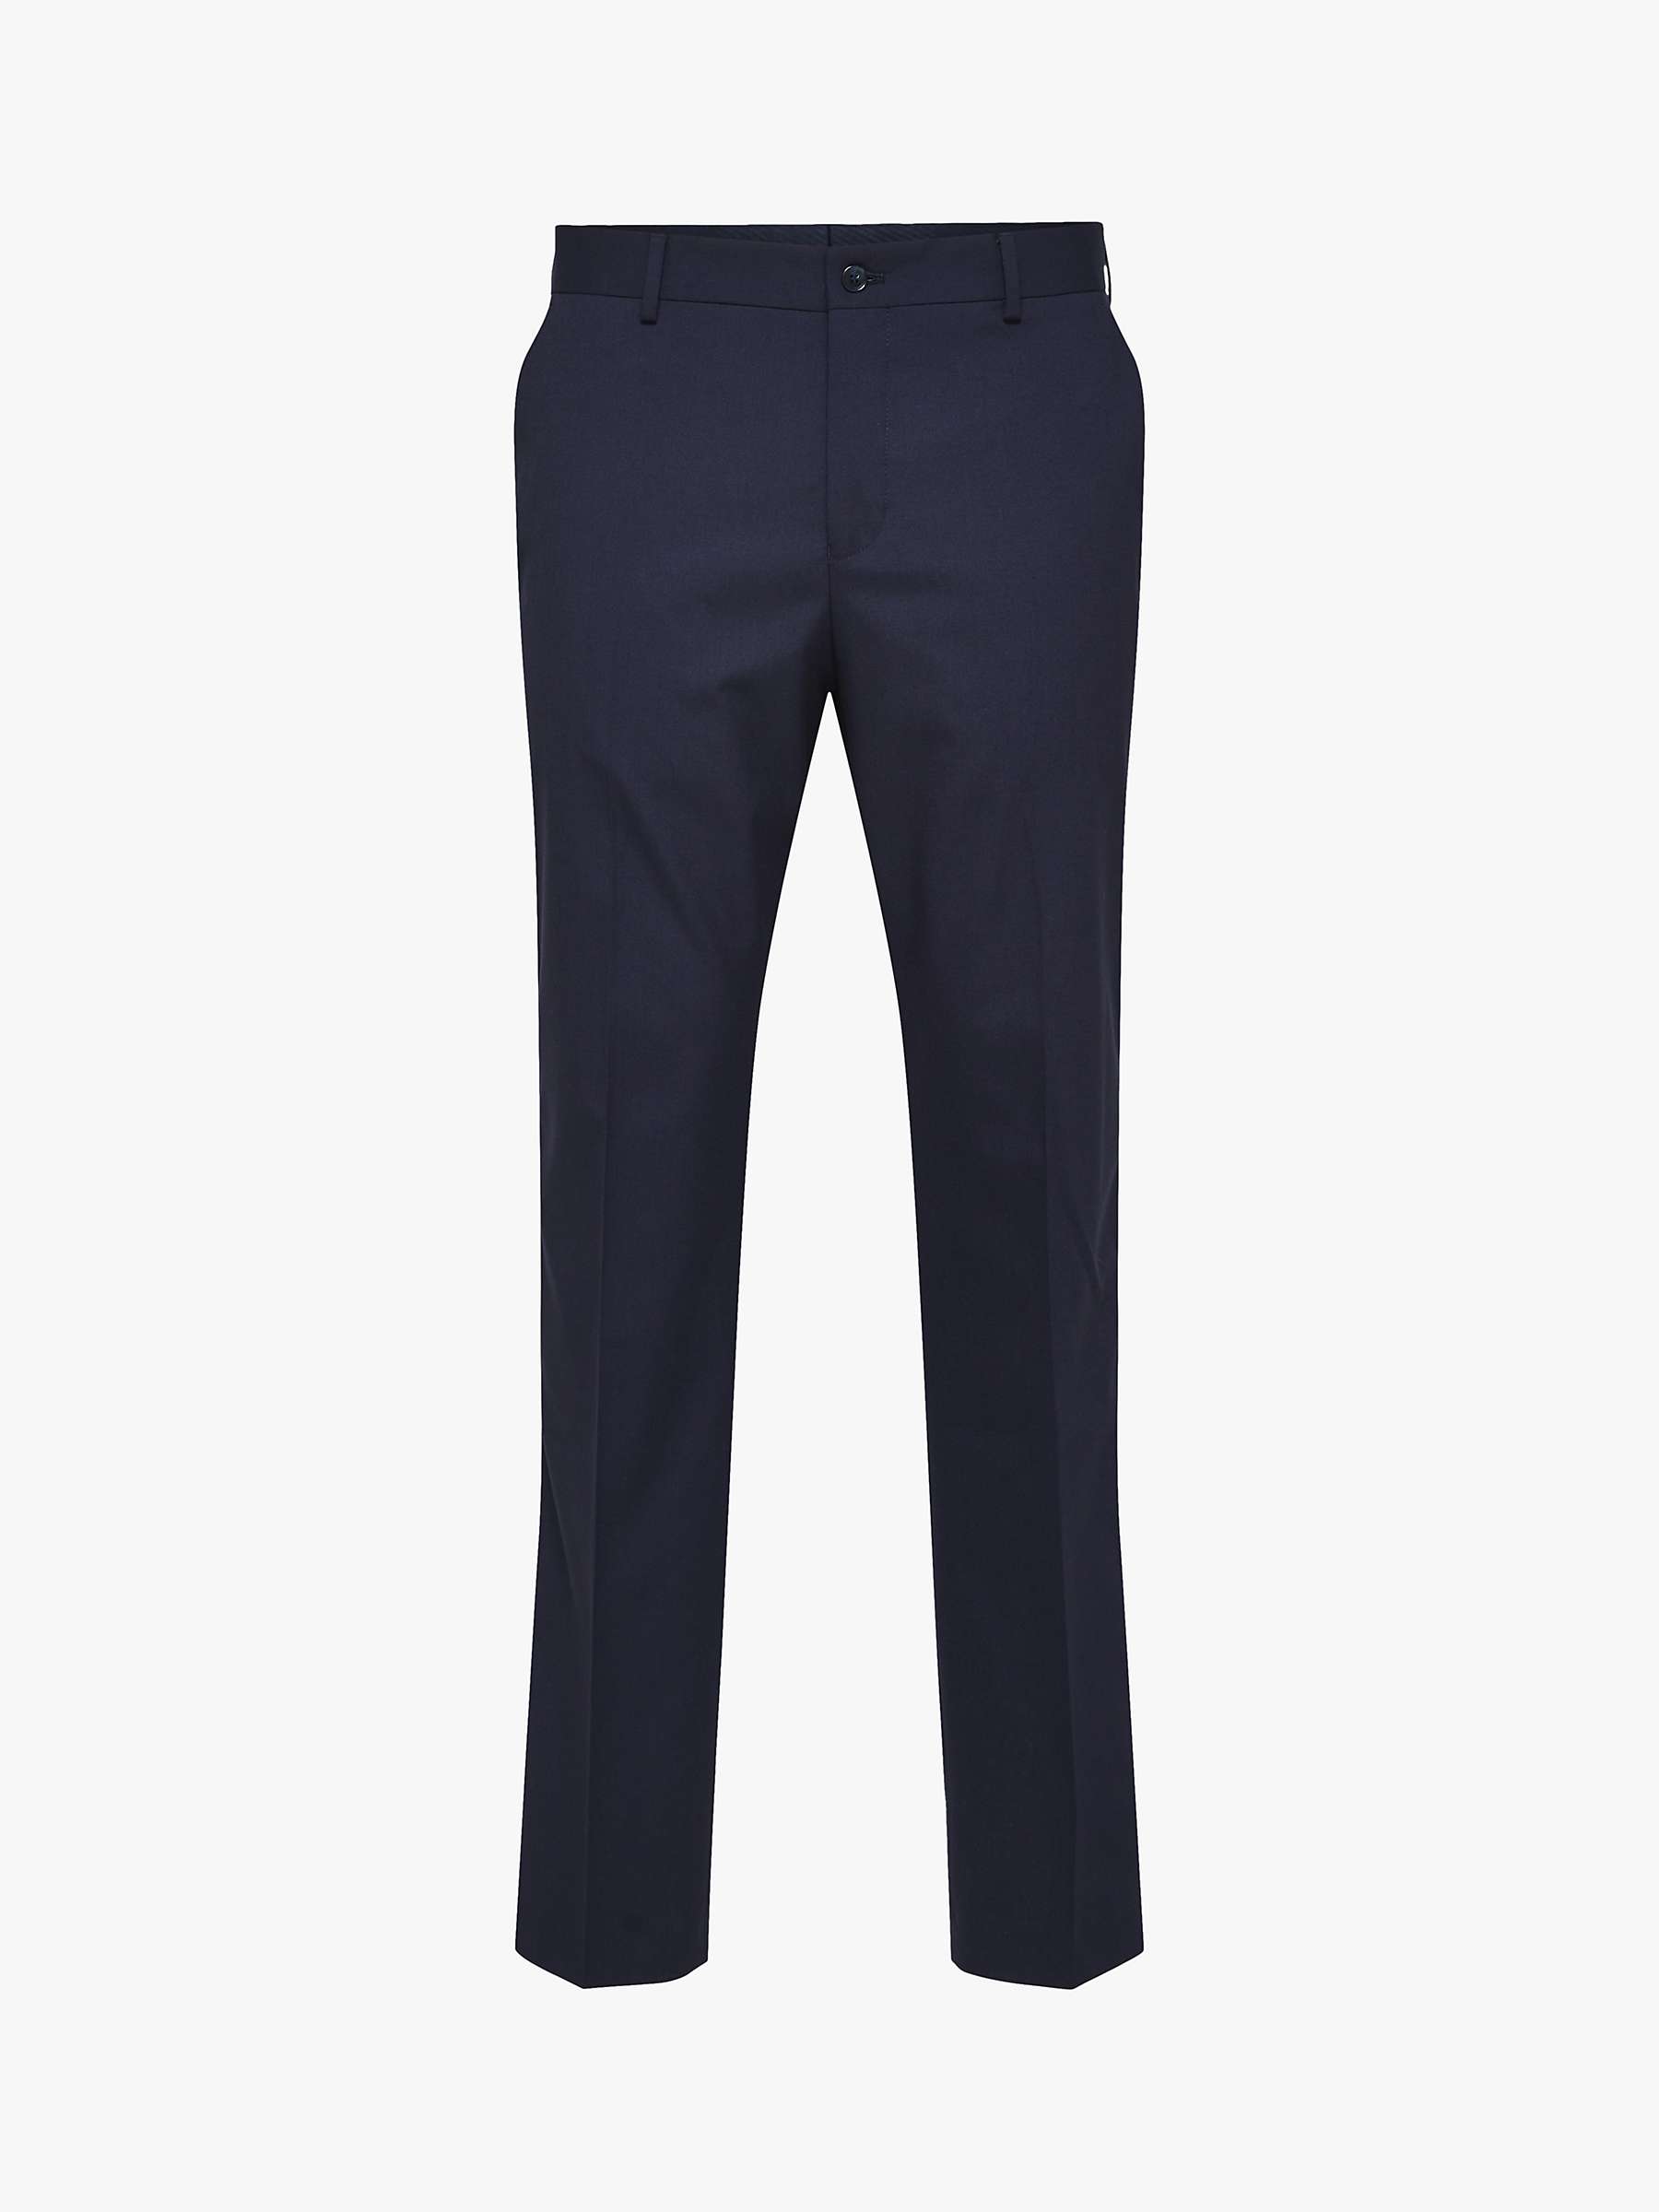 Buy SELECTED HOMME Recycled Polyester Slim Fit Tux Trousers, Navy Online at johnlewis.com